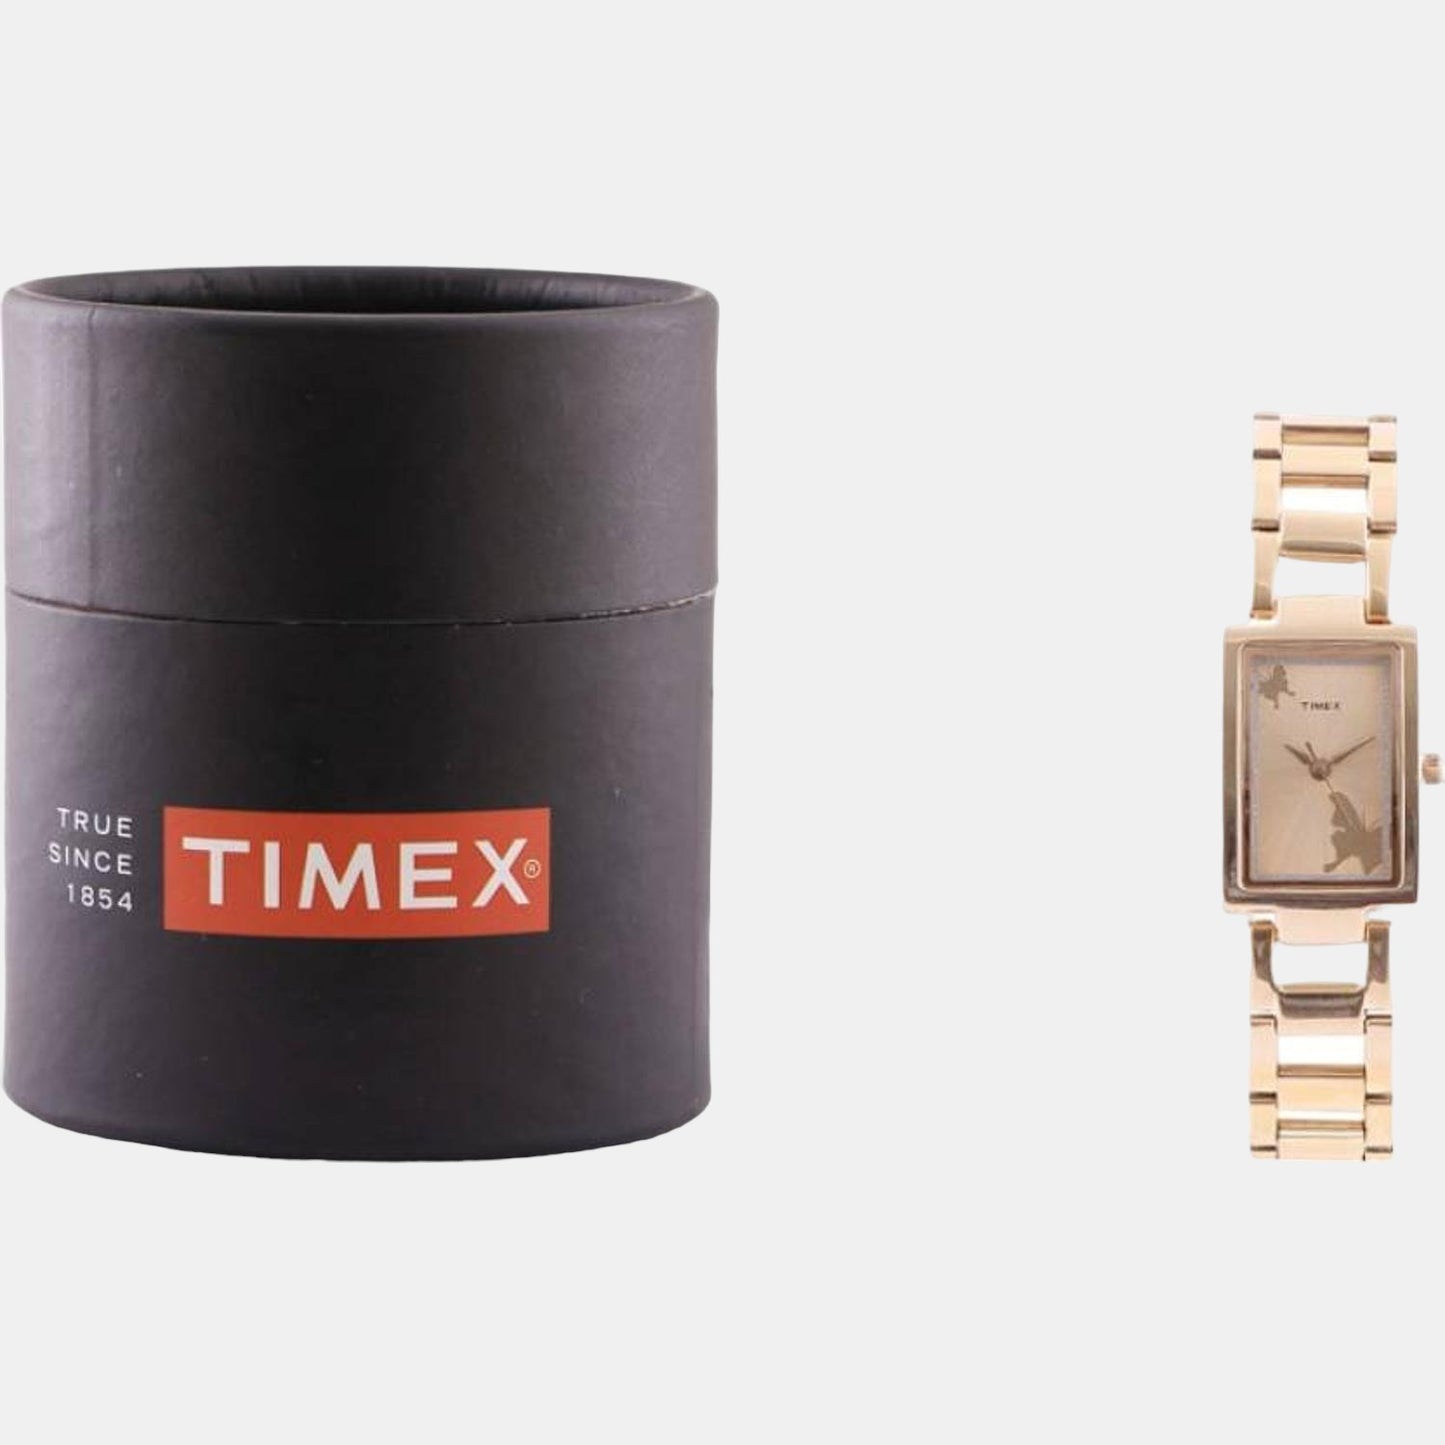 timex-stainless-steel-rose-gold-analog-female-watch-twel11303